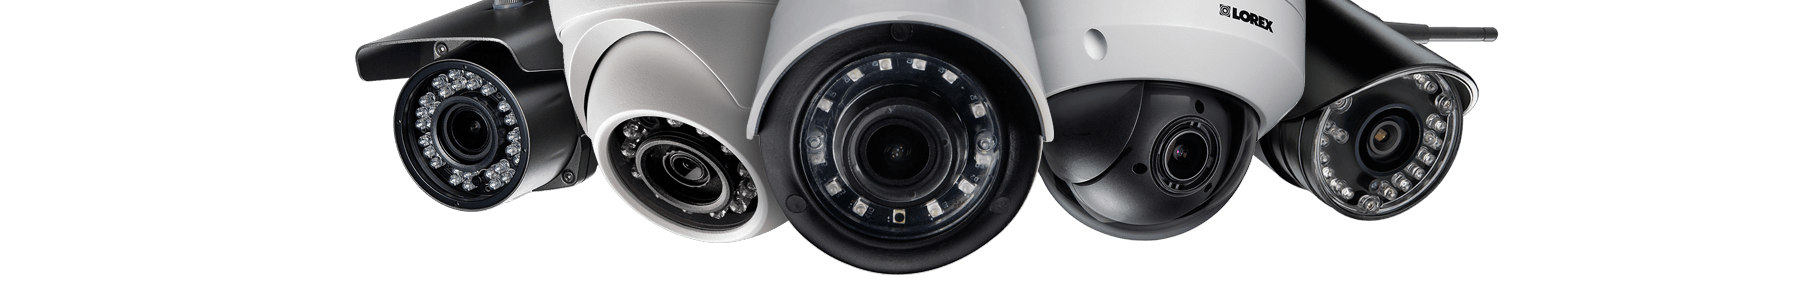 DVR supports all IP cameras